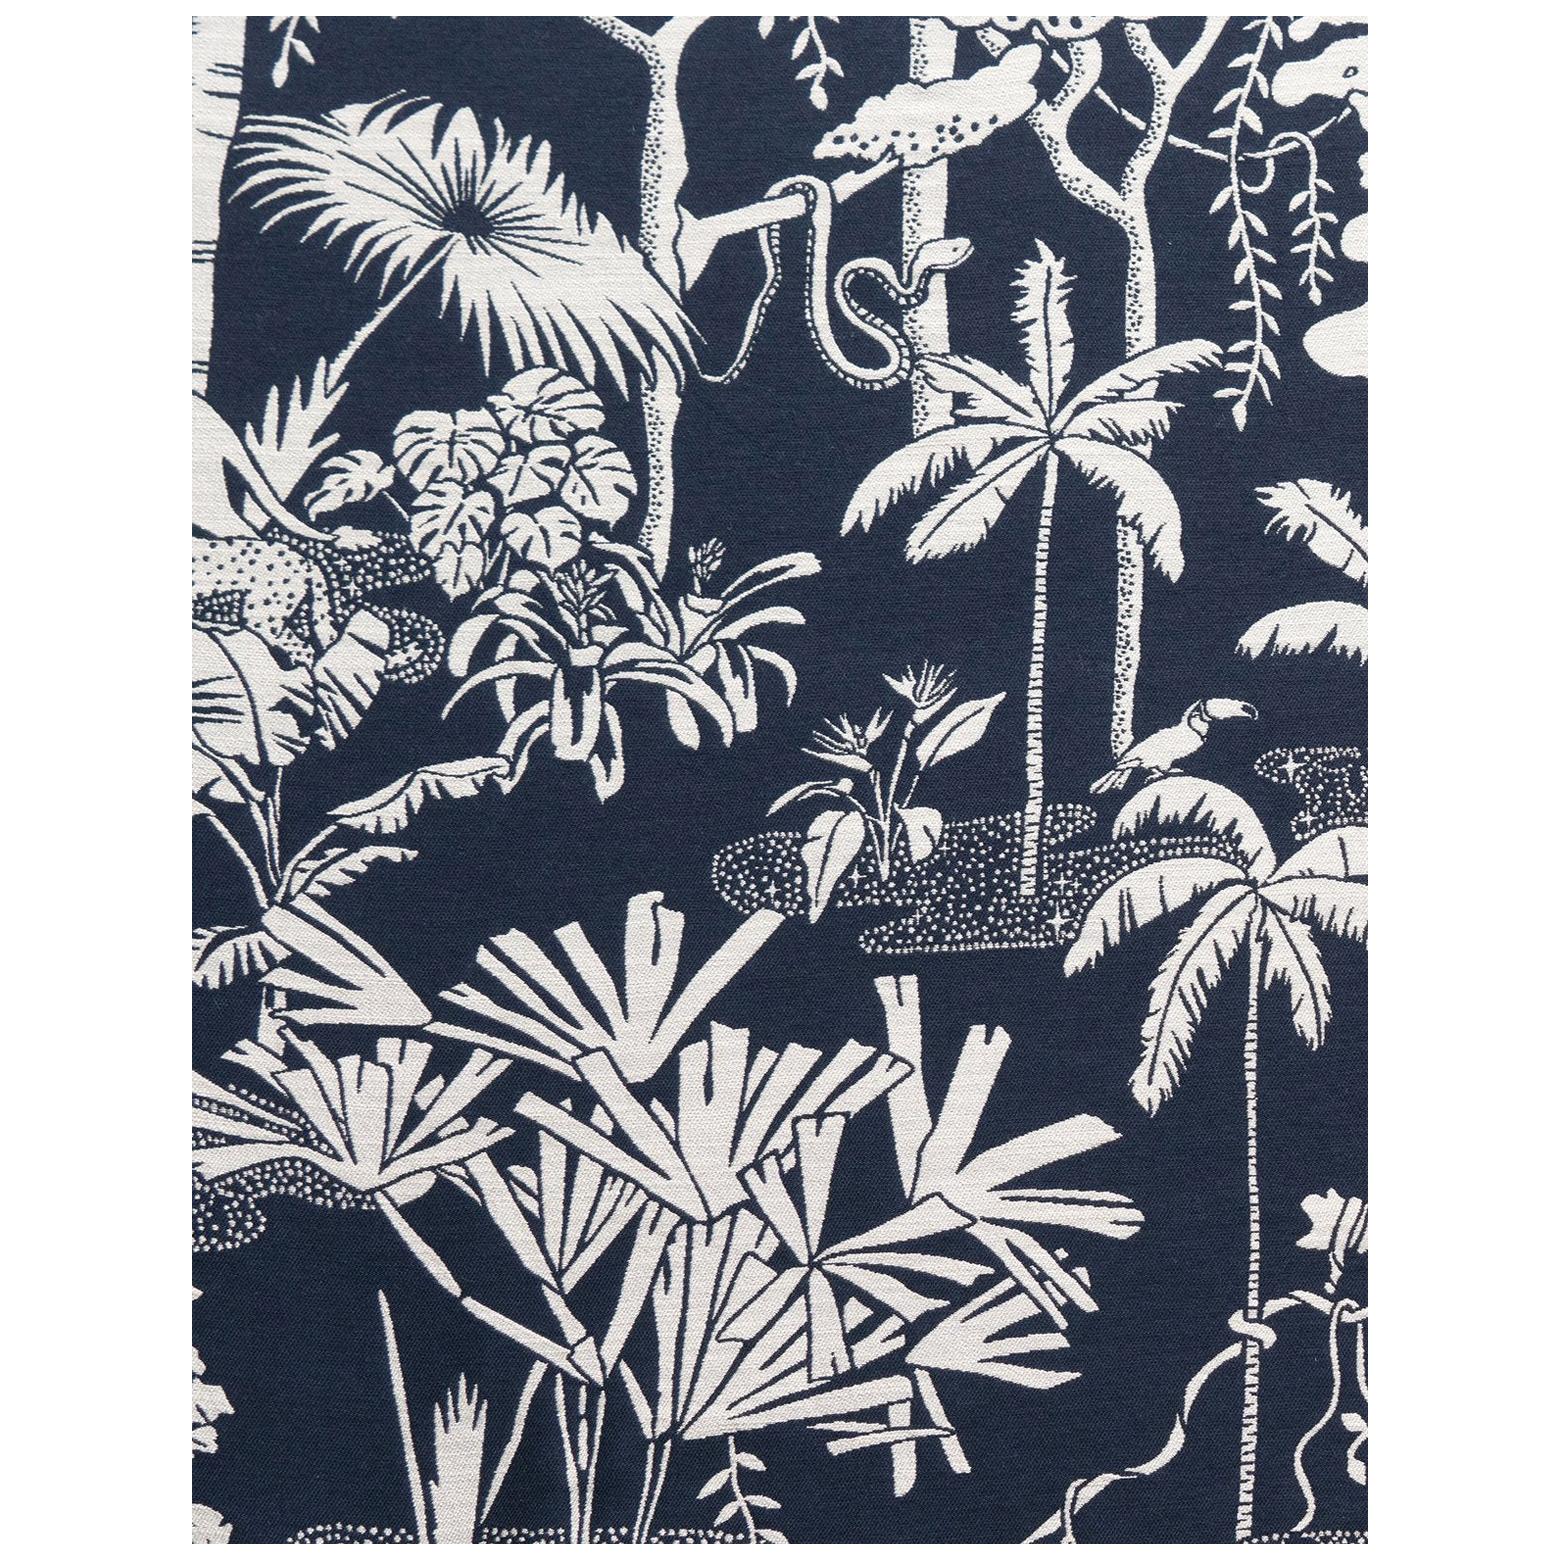 Jungle Dream Woven Commercial Grade Fabric in Oxford:: Weiß und Navy